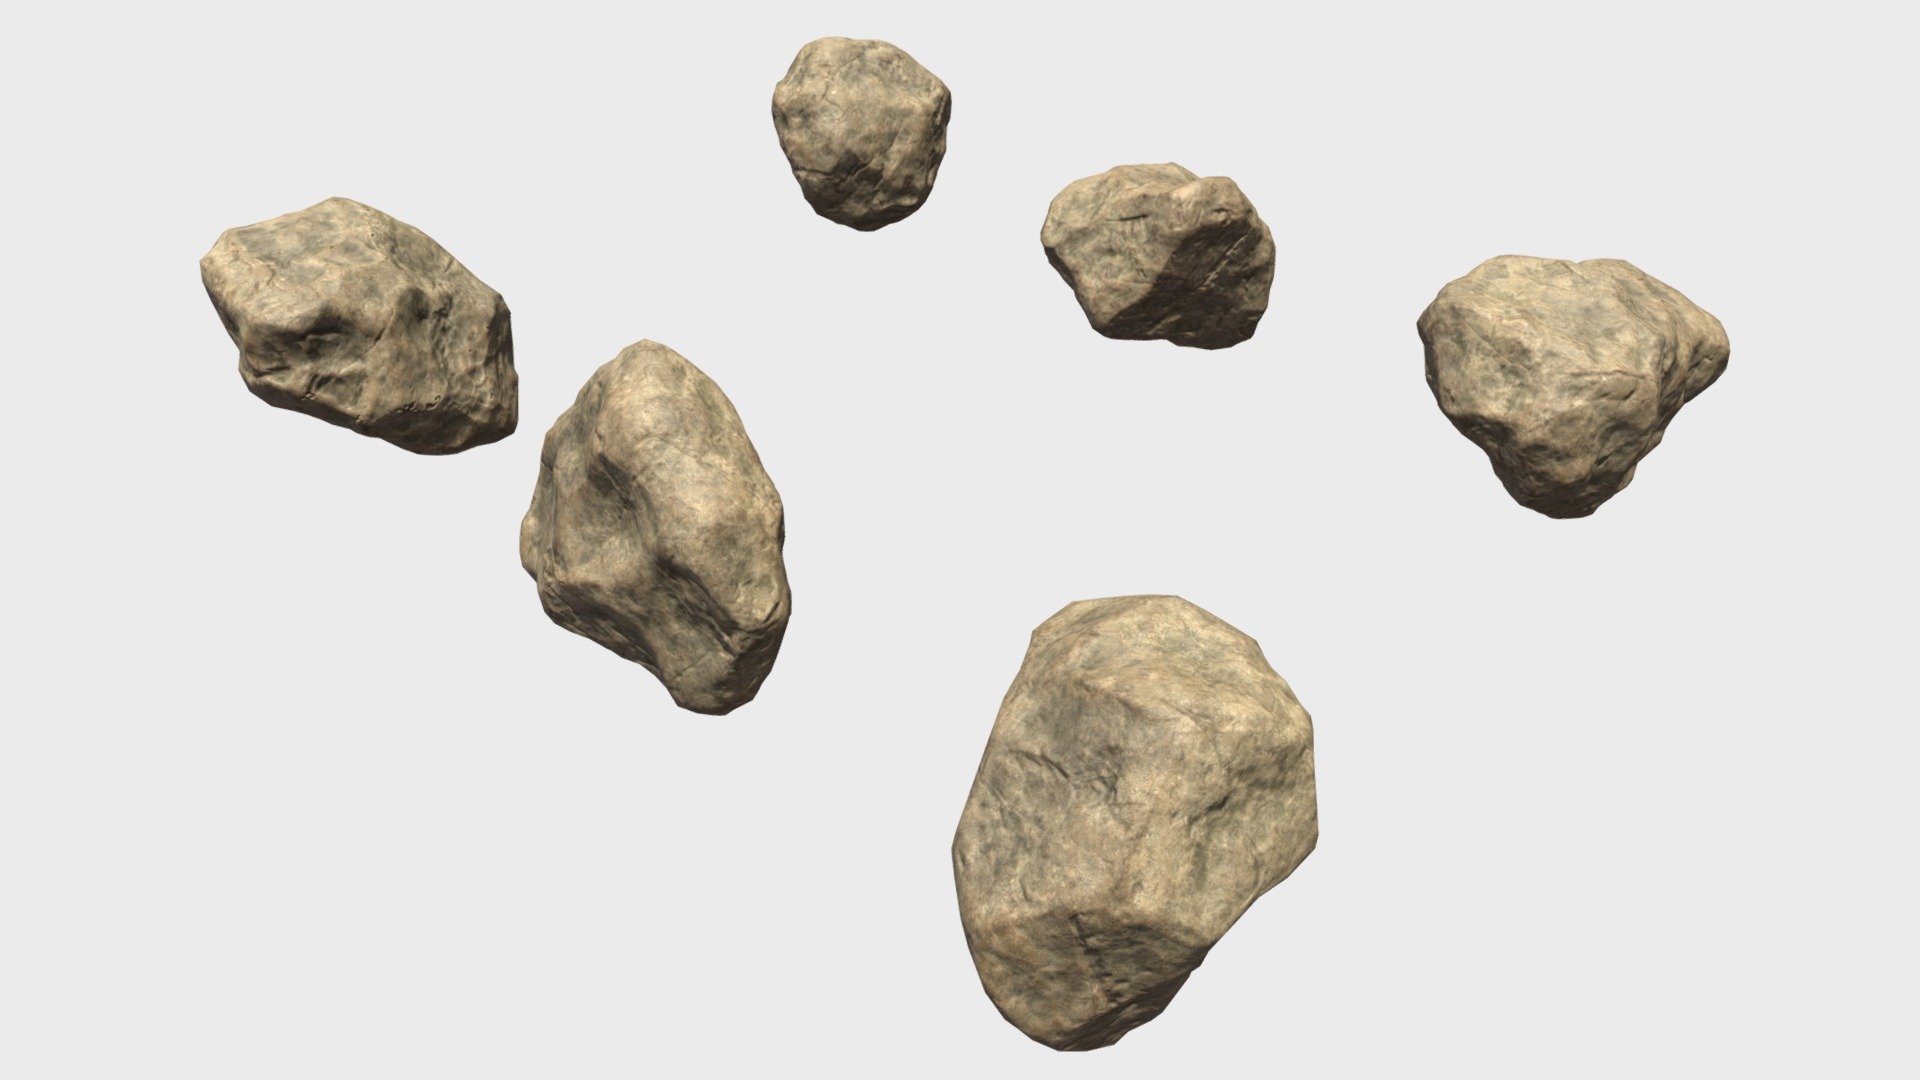 Realistic stones pack has 6 different PBR low poly rocks. These rocks are perfect for creating realistic environment, can be used in exterior visualisations and games. It's readily available to import in Unity3D and Ue4


Rock 1 Faces 1224, Verts 619

Rock 2 Faces 1426, Verts 716

Rock 3 Faces 1288, Verts 648

Rock 4 Faces 1702, Verts 860

Rock 5 Faces 1351, Verts 681

Rock 6 Faces 1154, Verts 584


Textures PBR 4096x4096 24b Png 63 Mb - Stones Pack - 3D model by Crazy_8 (@korboleevd) 3d model